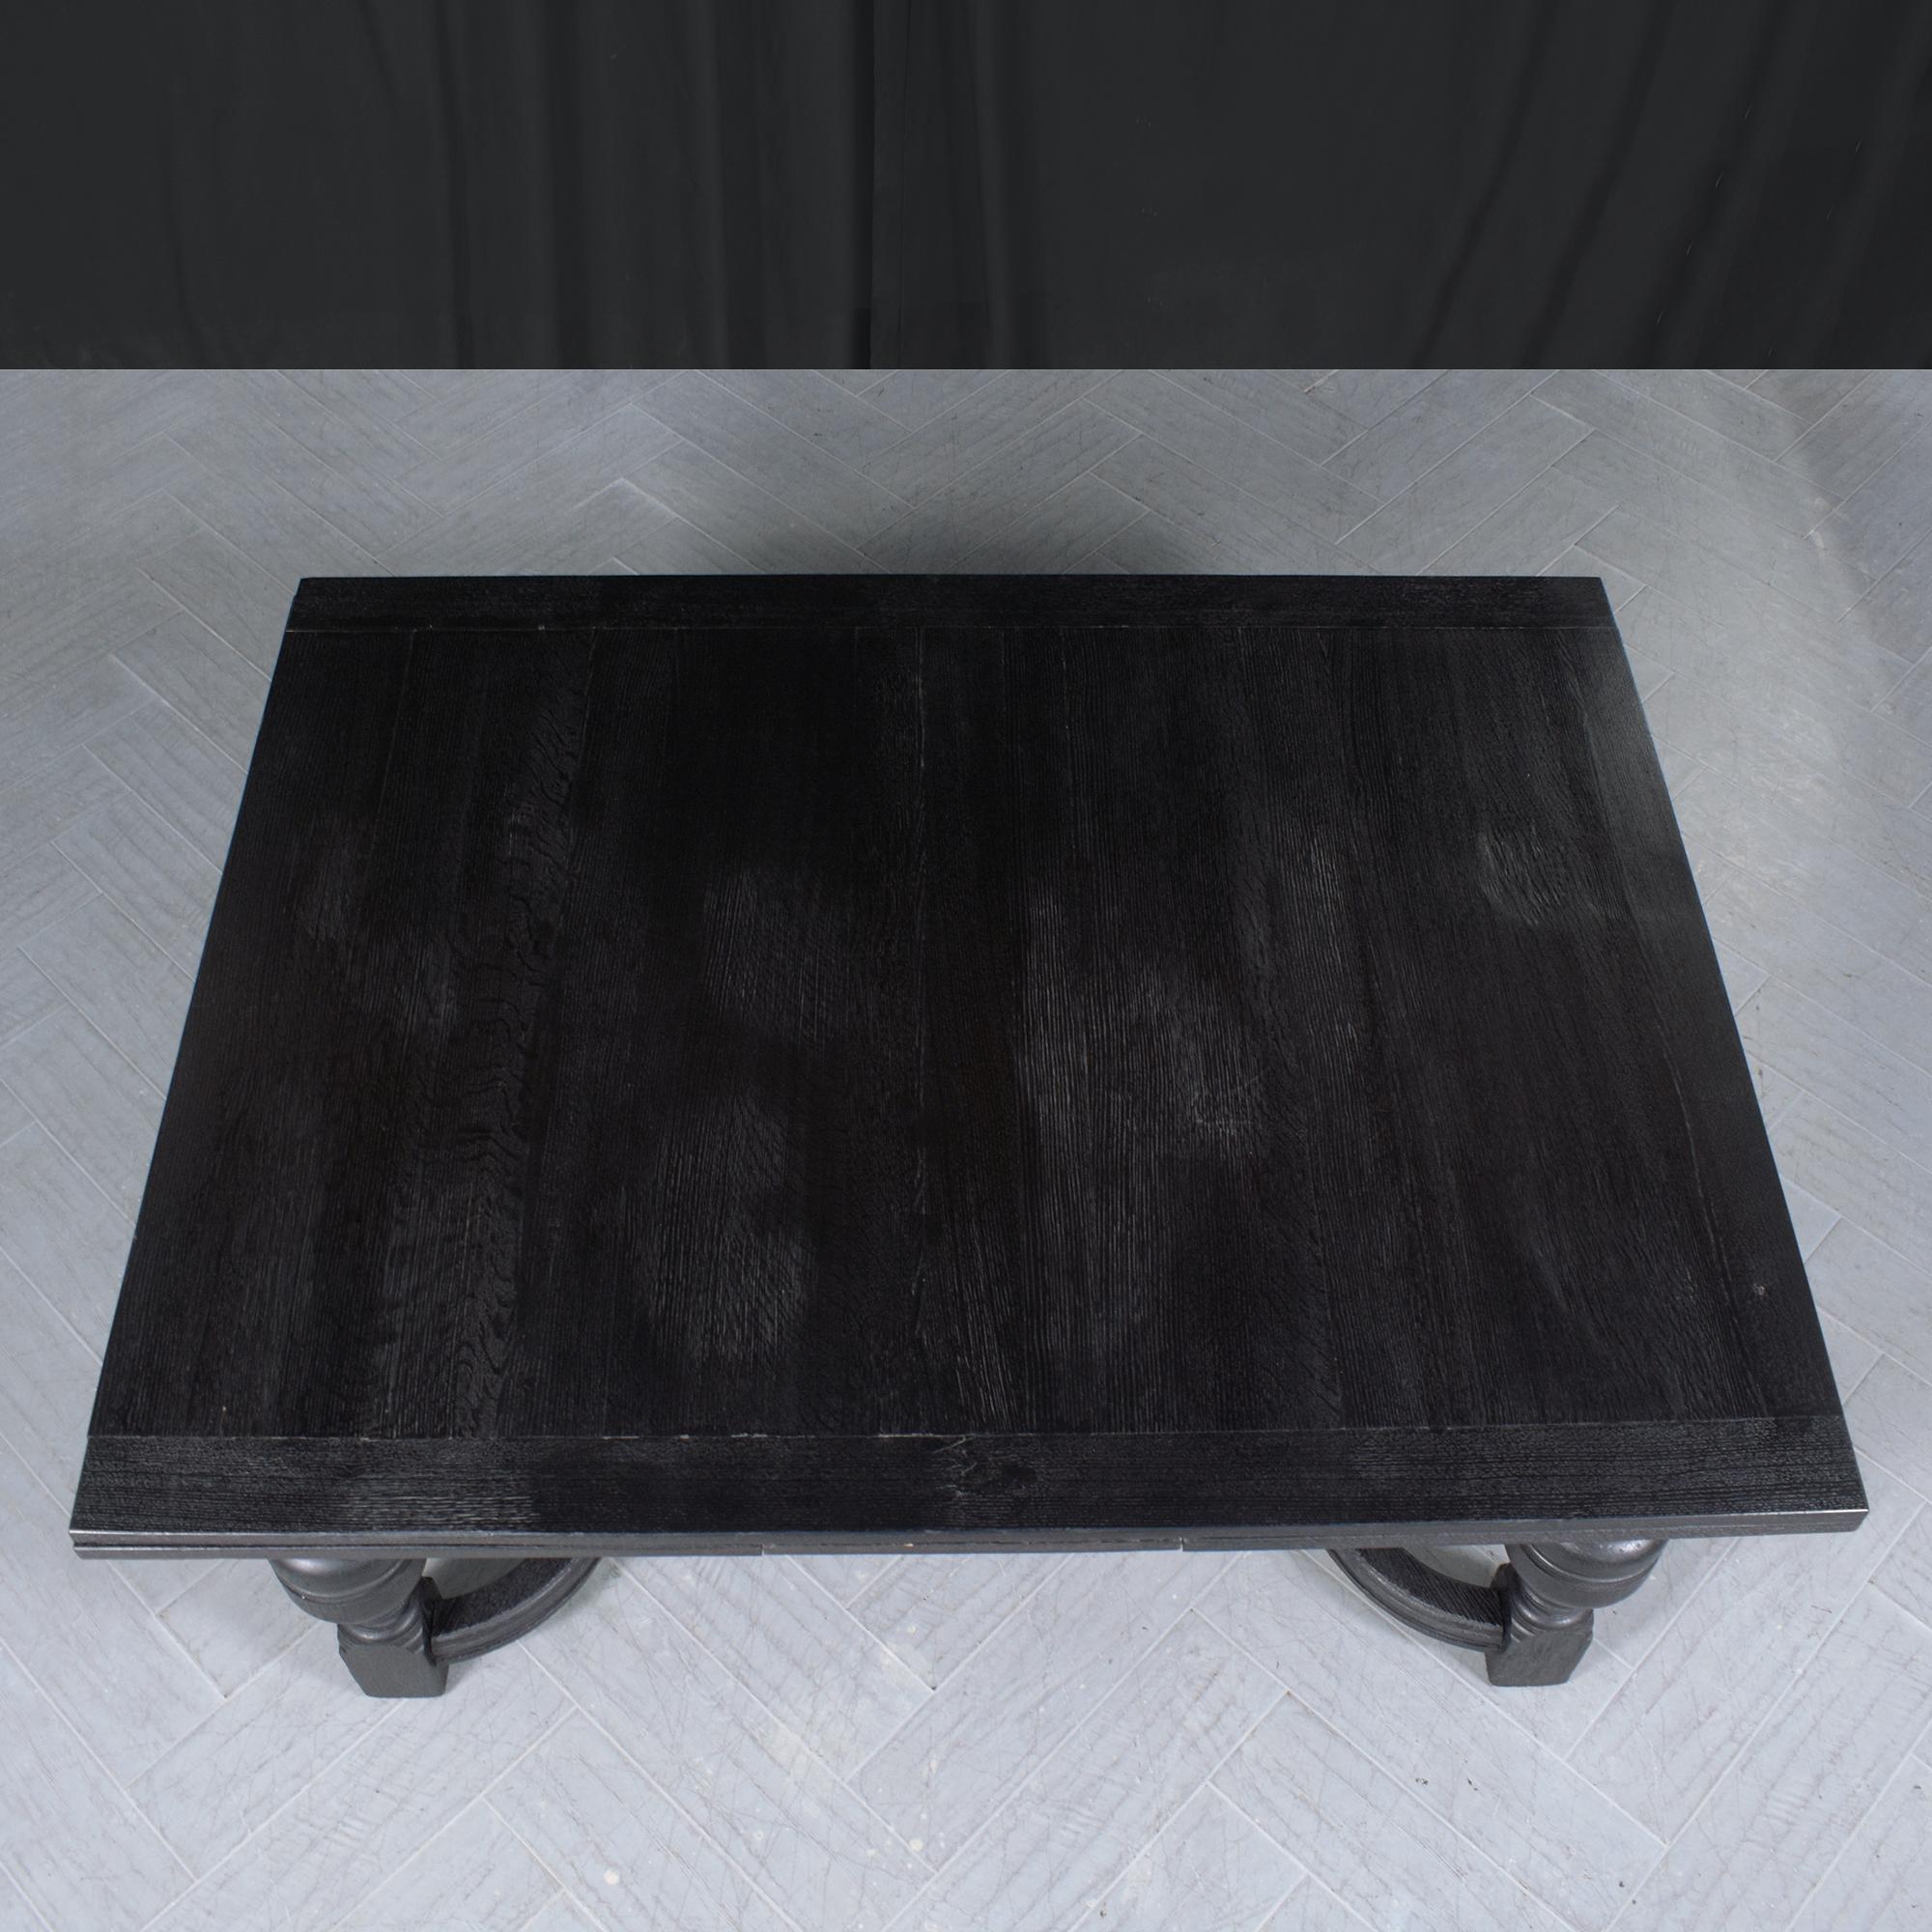 1850s Spanish Extendable Dining Table: Ebonized Solid Wood with French Design For Sale 4